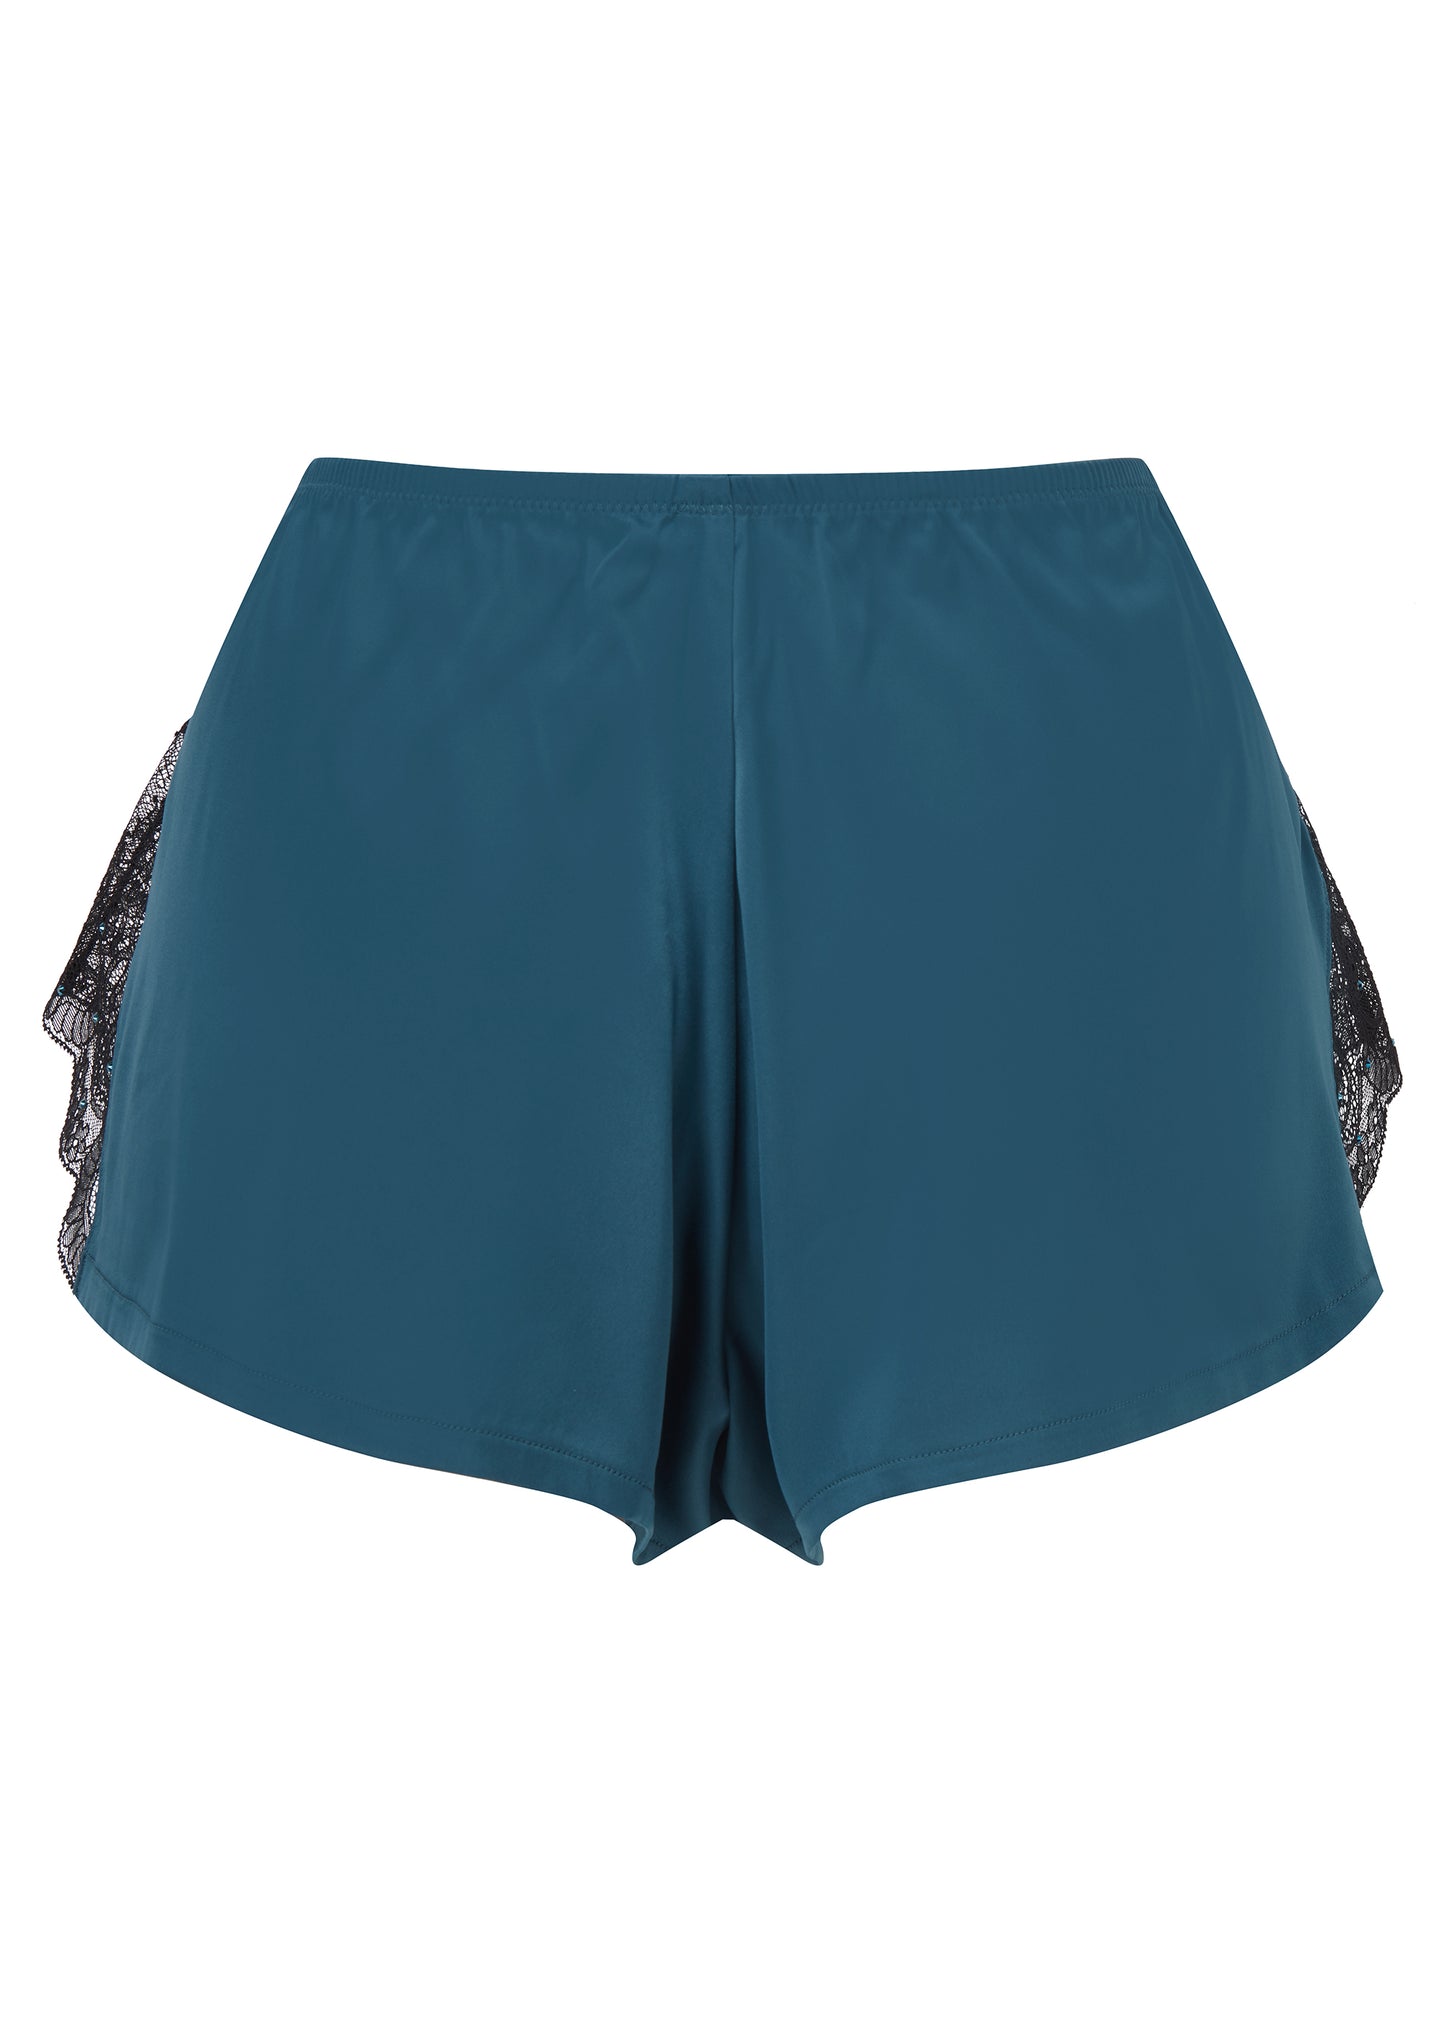 VIP Confession Satin French Knickers in Teal/Black By Gossard - XS-L